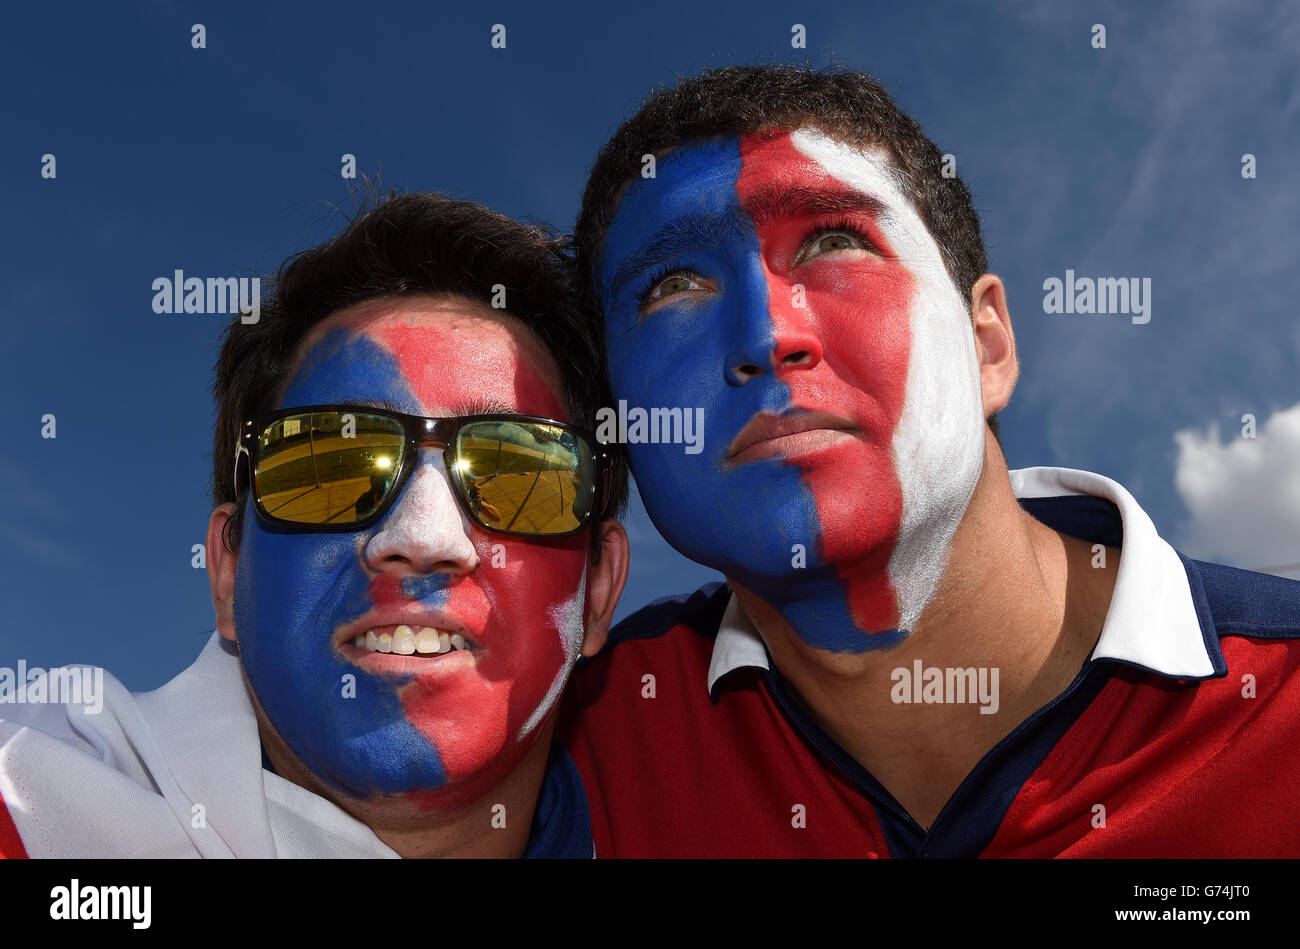 Soccer - FIFA World Cup 2014 - Group B - Chile v Australia - Arena Pantanal. Chile fans on the streets of Cuiaba close to the Arena Pantanal early before kick-off. Stock Photo